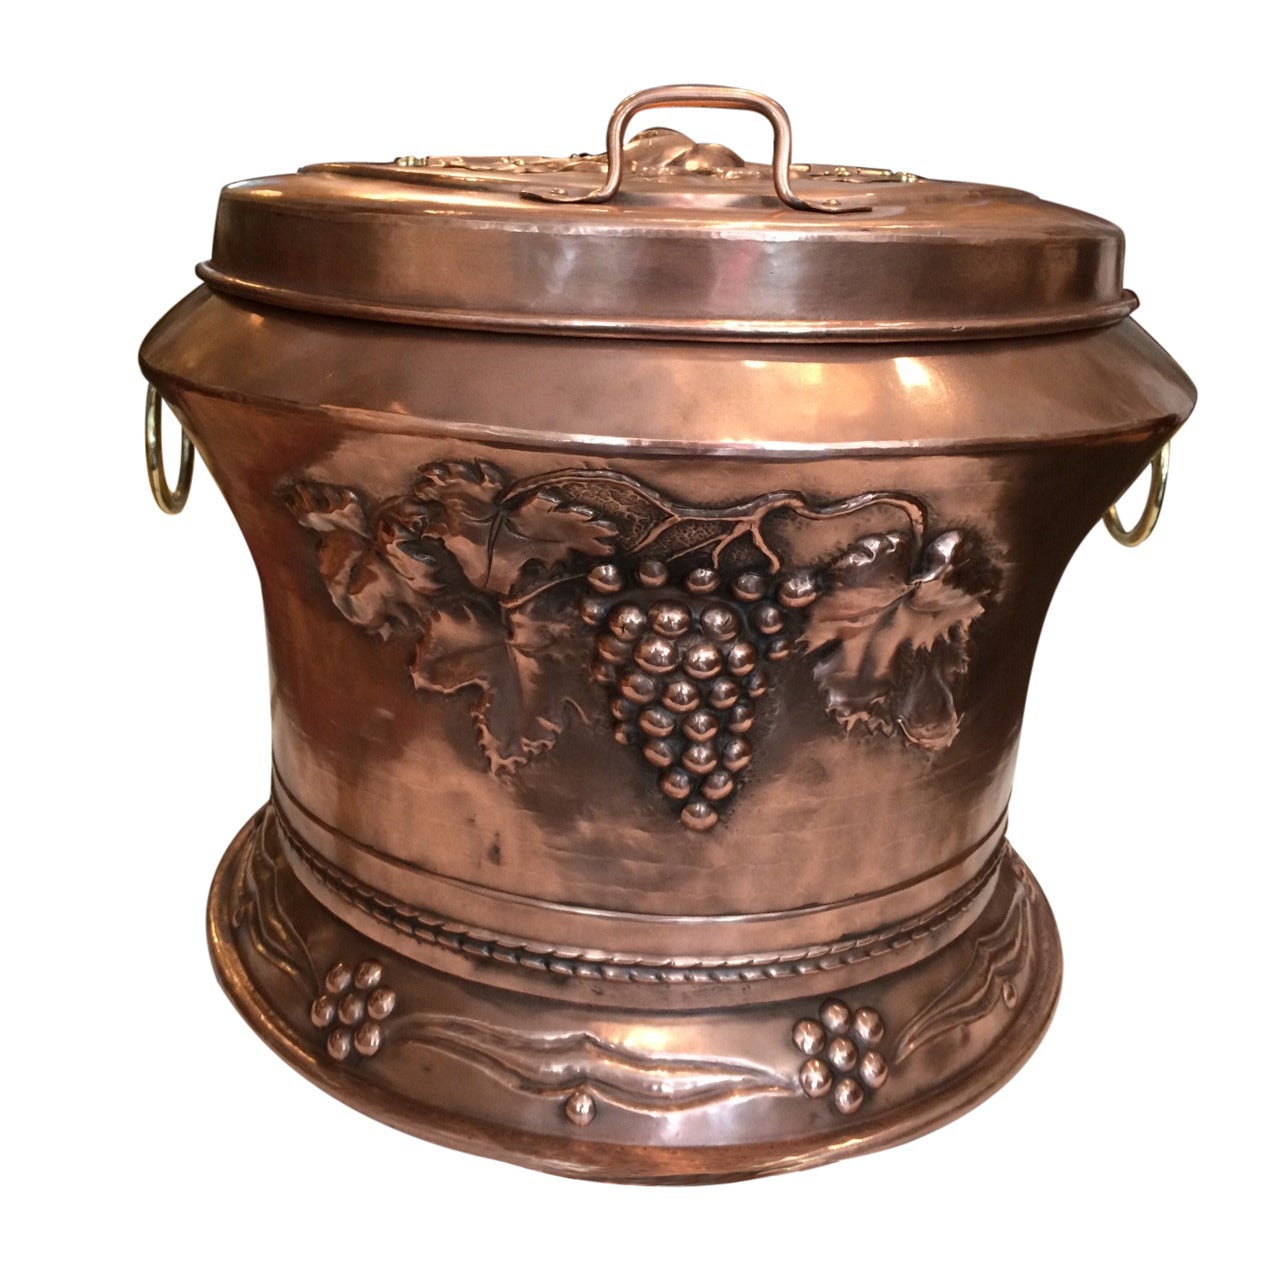 Gigantic and Rare Find of a Copper Wine Cooler